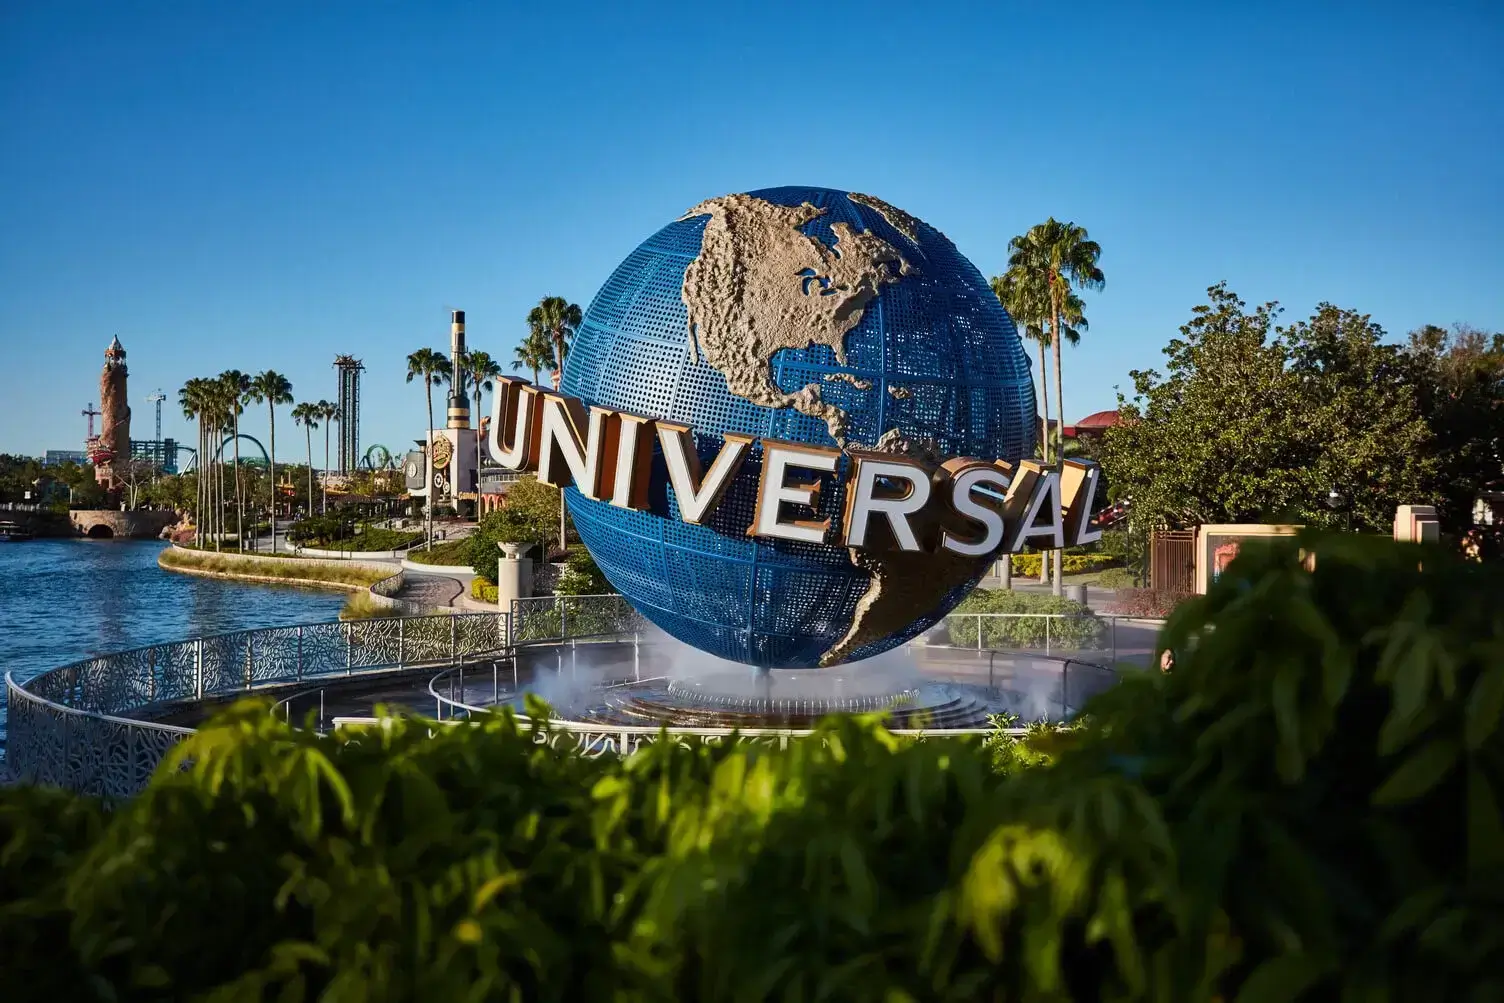 FREE Islands of Adventure 1-Day Touring Plan - Accurate & Up-to-Date